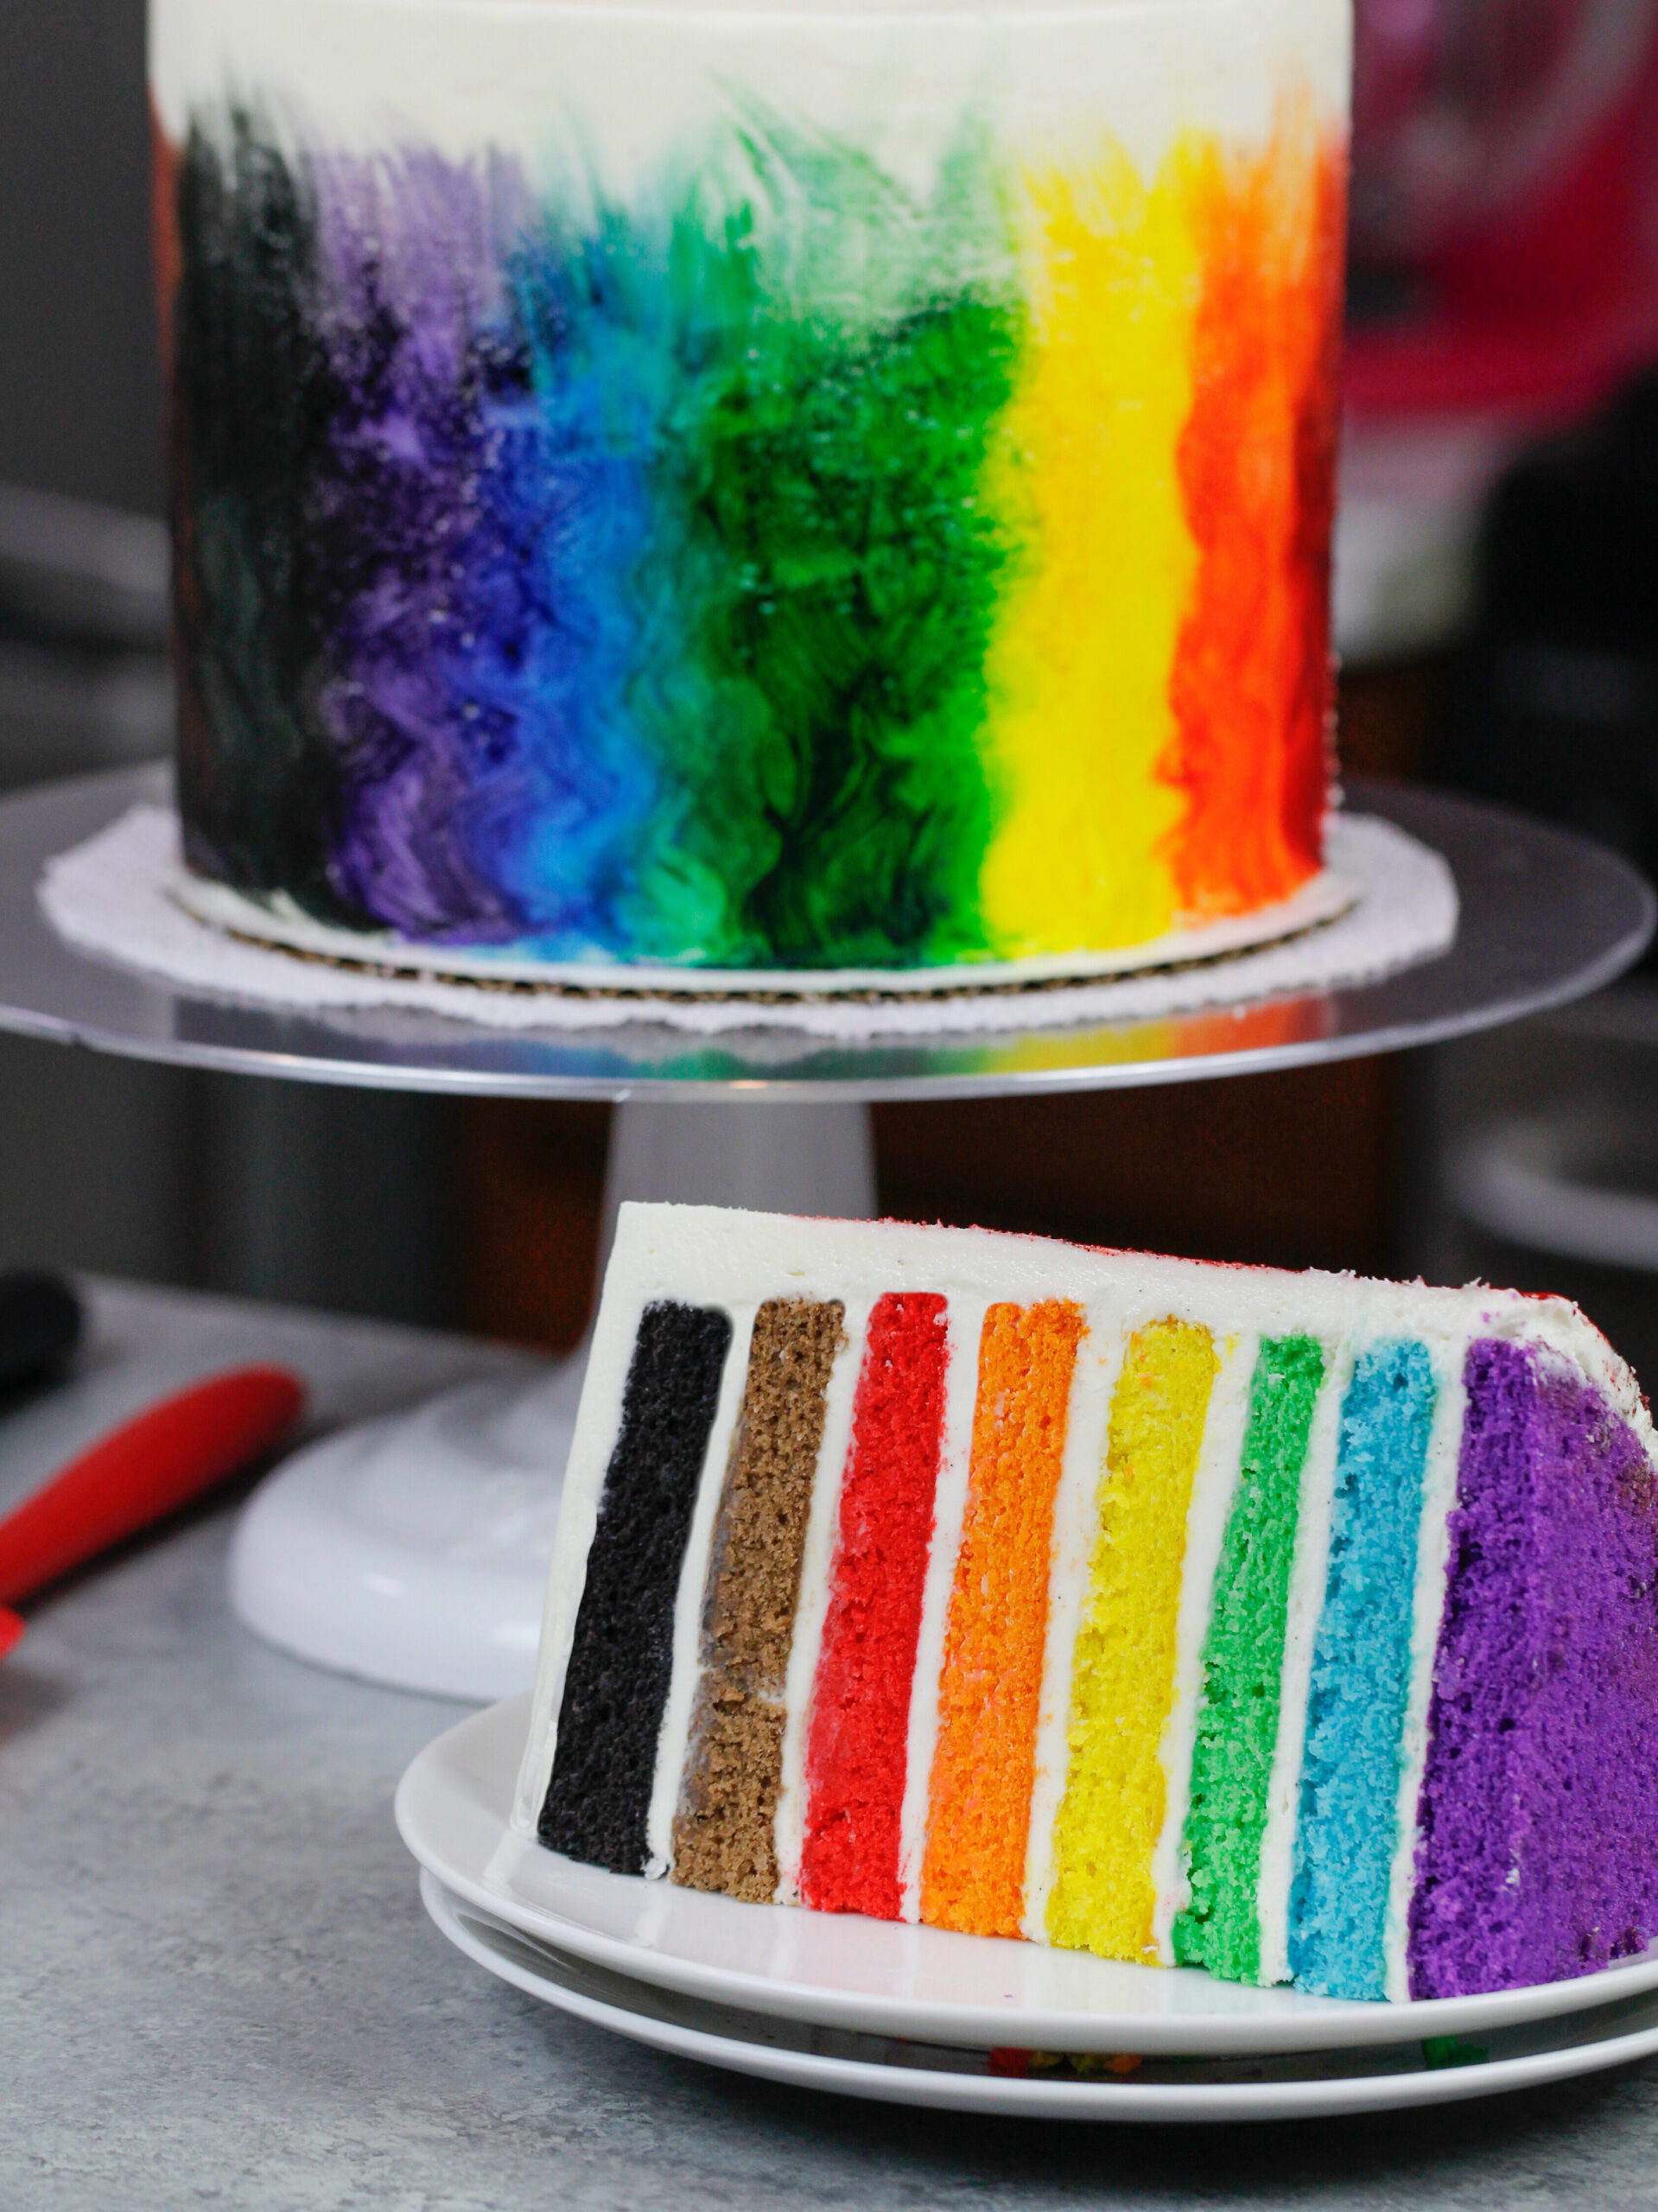 image of rainbow pride cake cut open to show 8 rainbow layers
